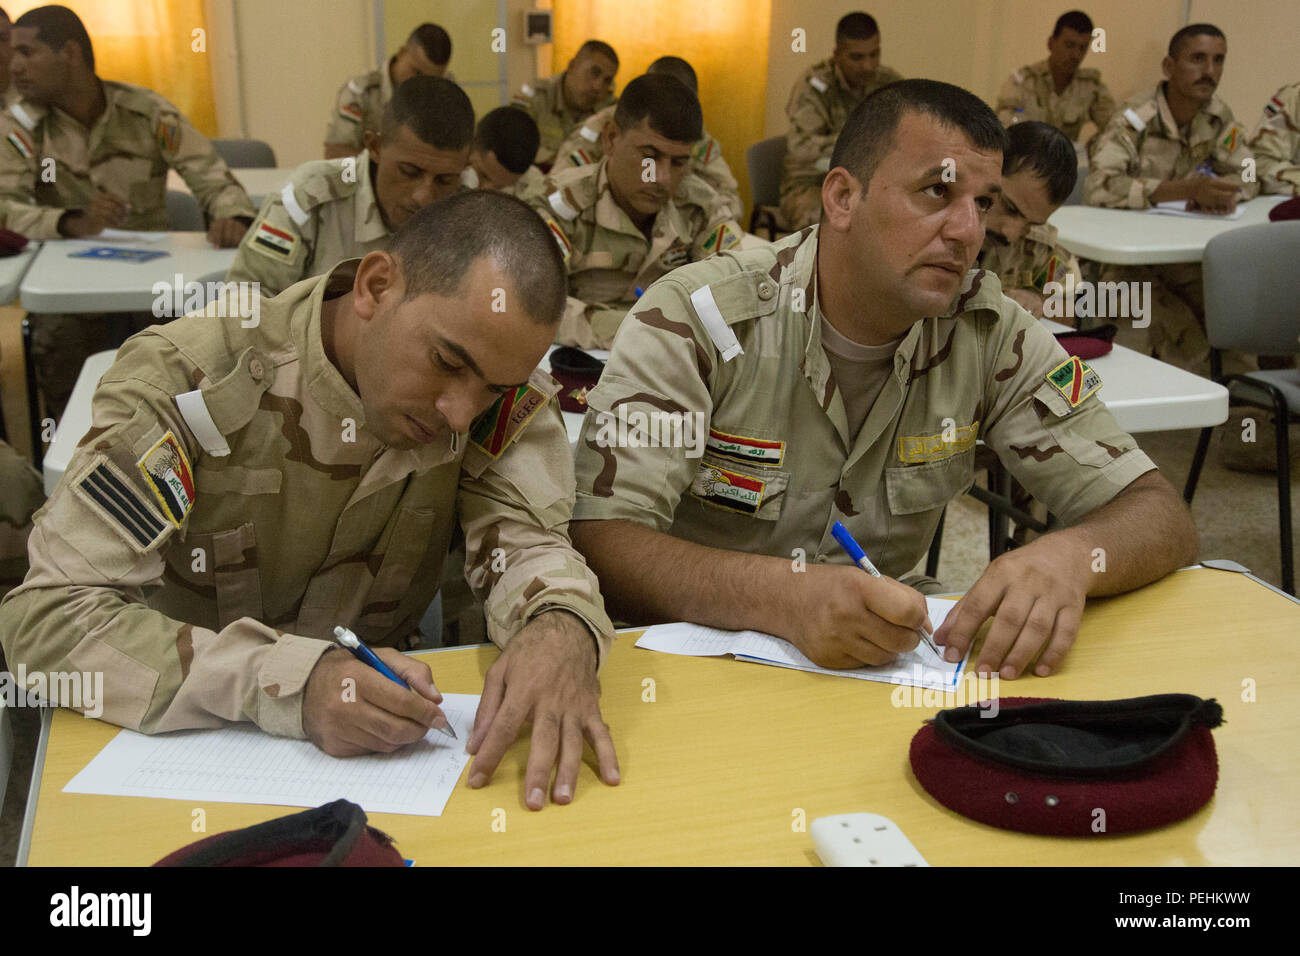 Iraqi soldiers attending the noncommissioned officer academy take a map reading test at Camp Taji, Iraq, Aug. 23, 2015. Task Group Taji spearheaded the academy concept in order to teach Iraqi NCOs how to train and care for their soldiers in different situations. Through professional development with the Iraqi NCOs, Combined Joint Task Force – Operation Inherent Resolve is empowering the Iraqi security forces in the fight against the Islamic State of Iraq and the Levant. (U.S. Army photo by Spc. Paris Maxey/Released) Stock Photo